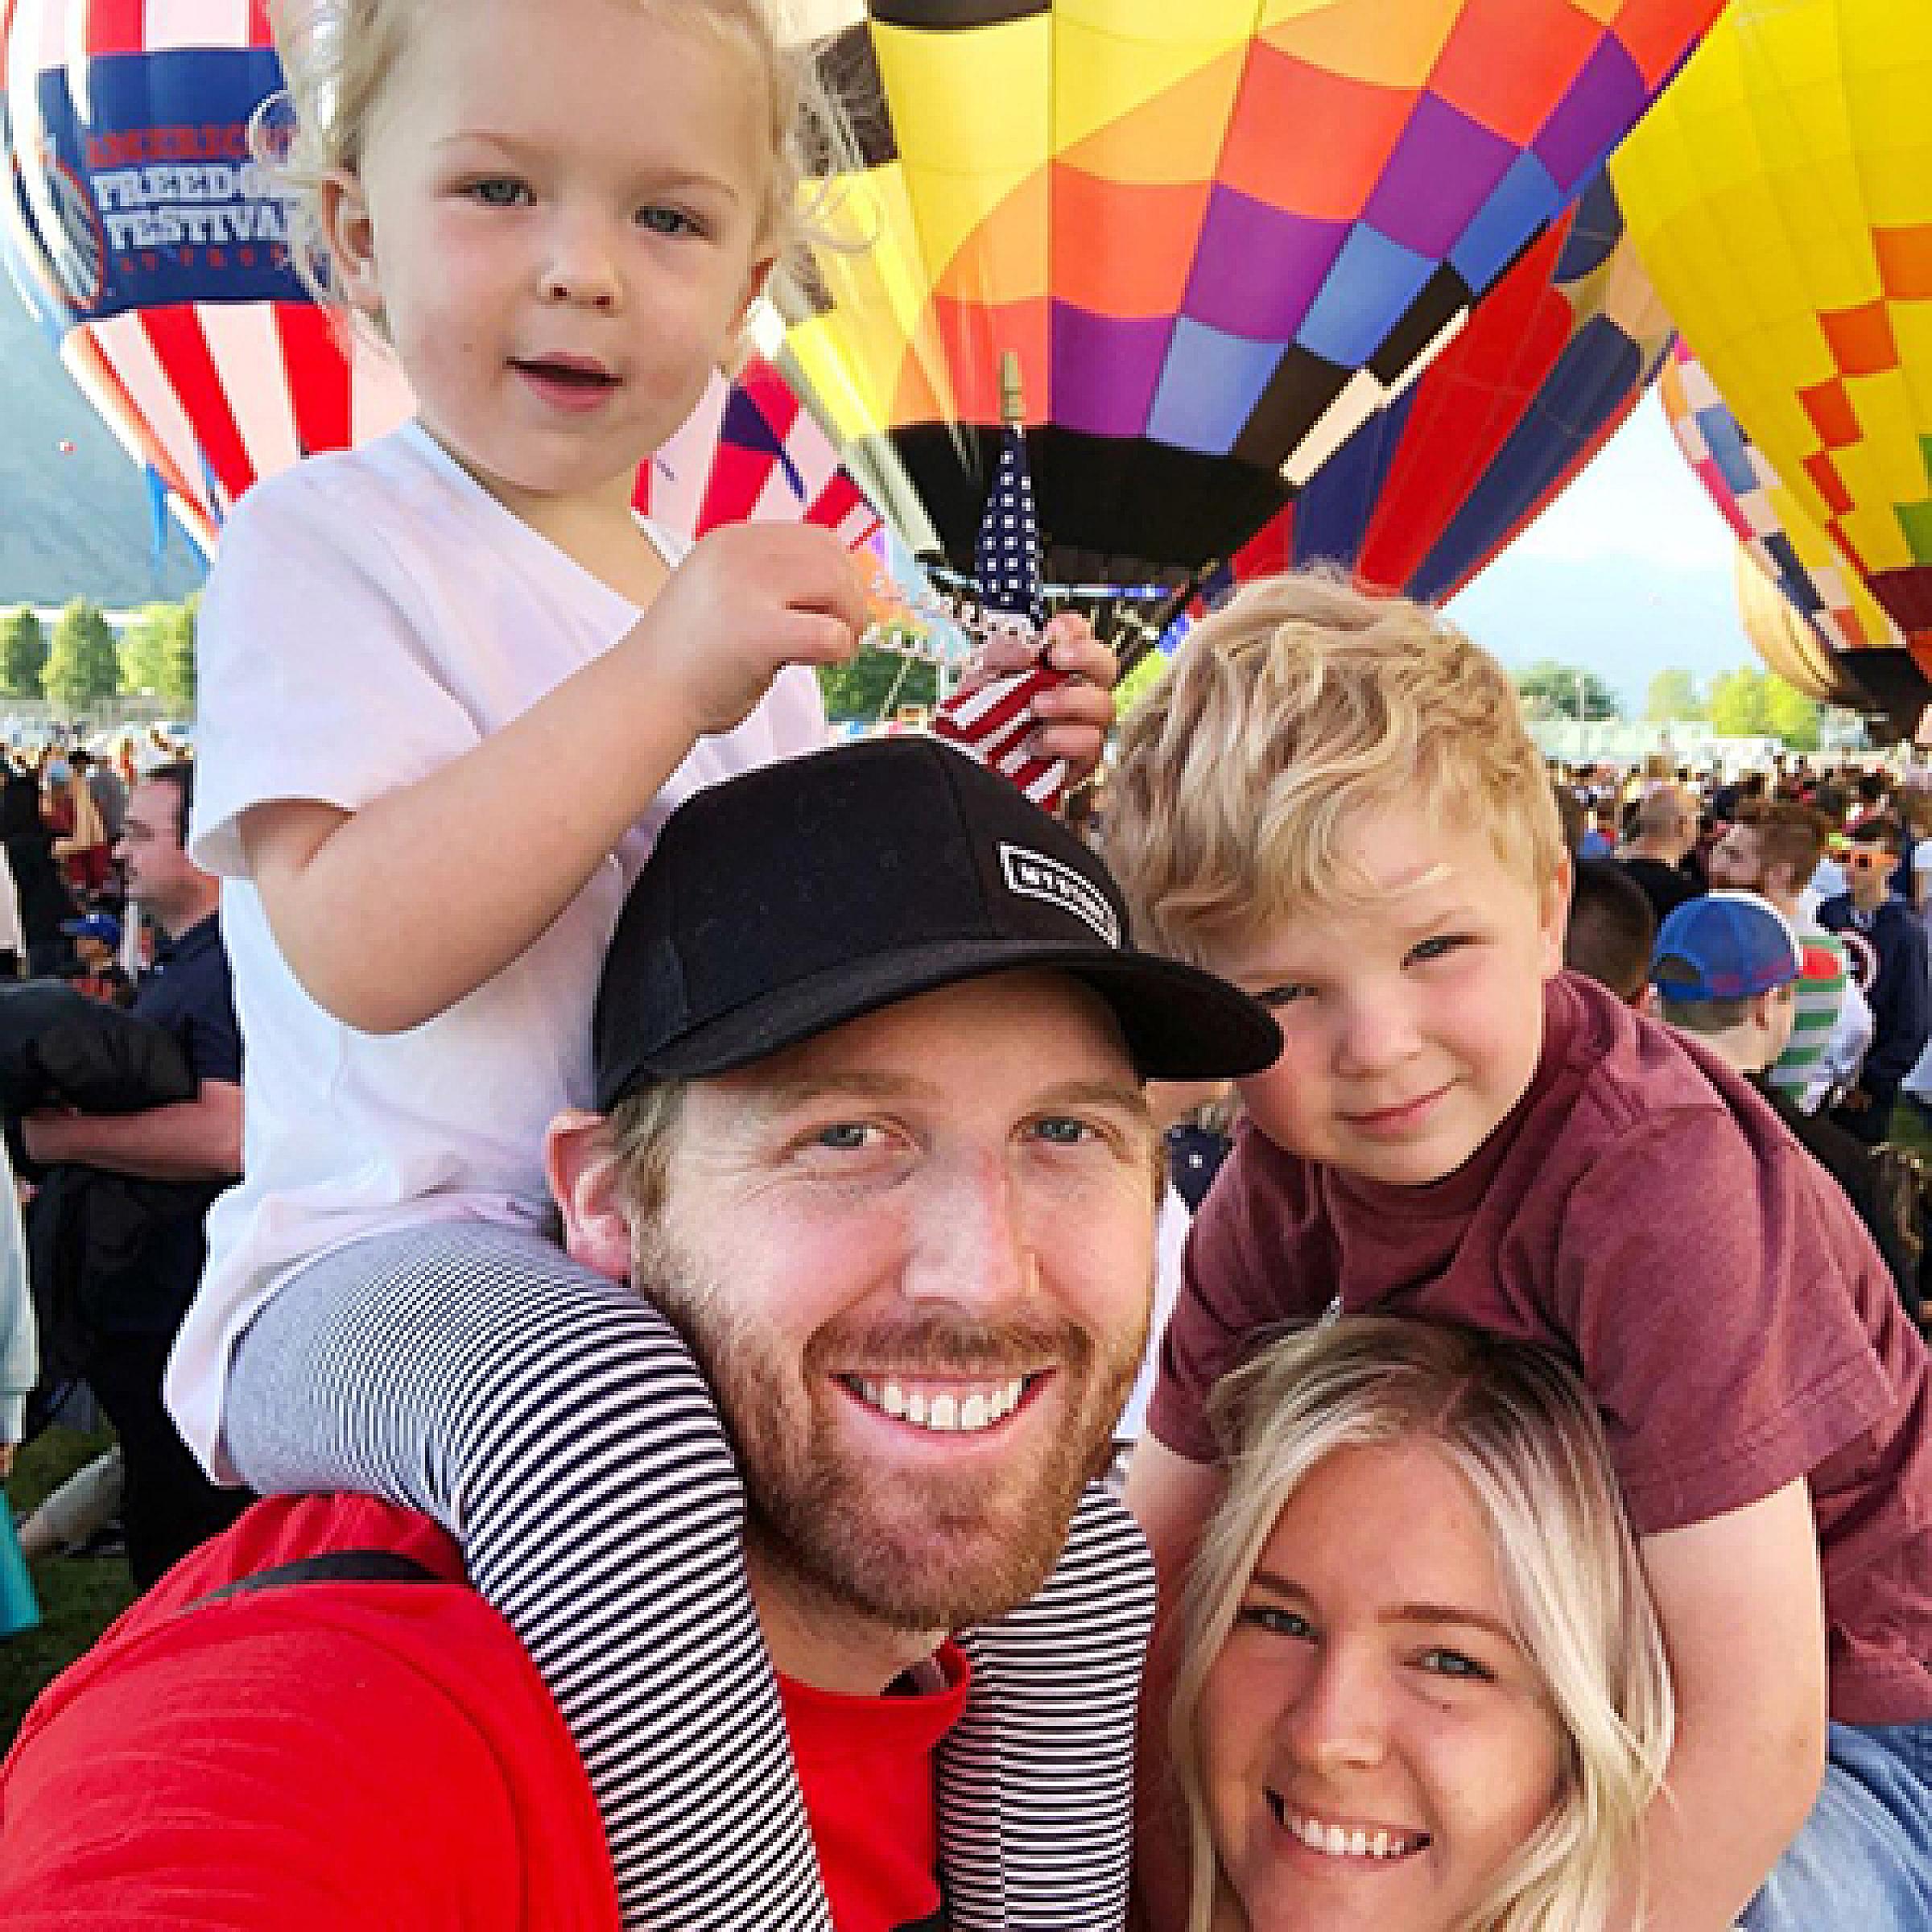 Ashley and her family at a hot air balloon festival